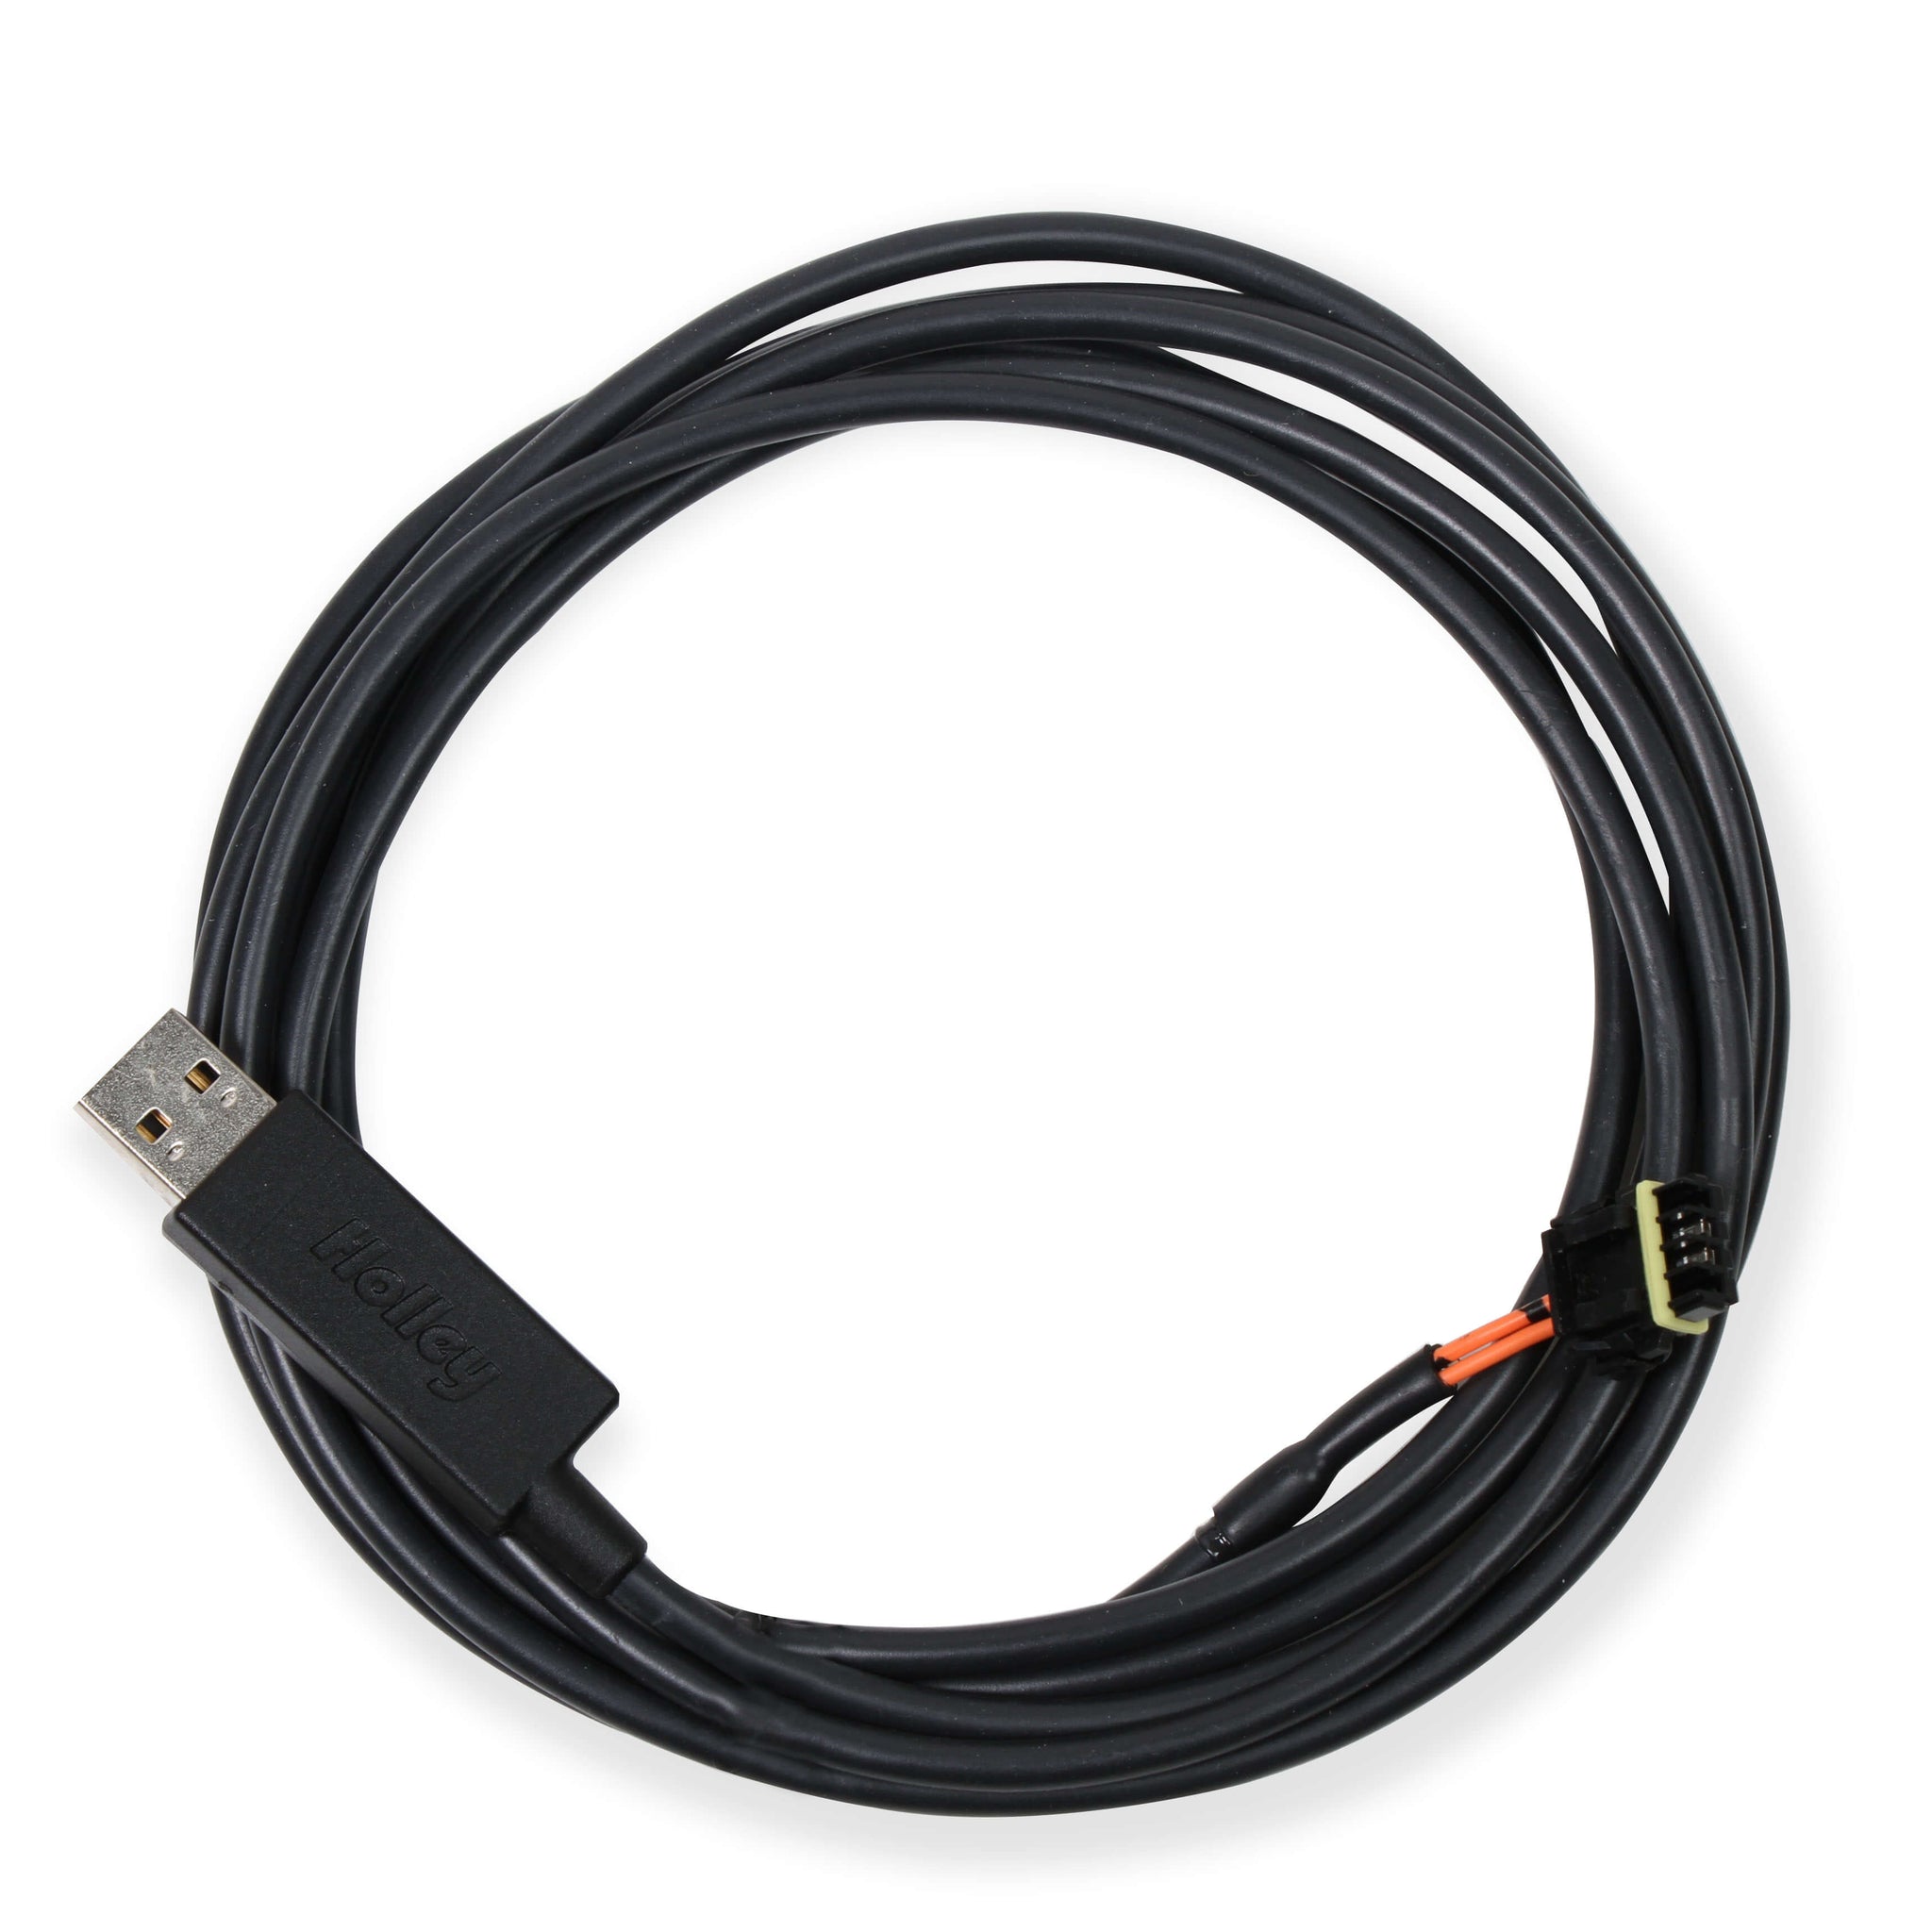 Holley EFI CAN to USB Dongle- Communication Cable